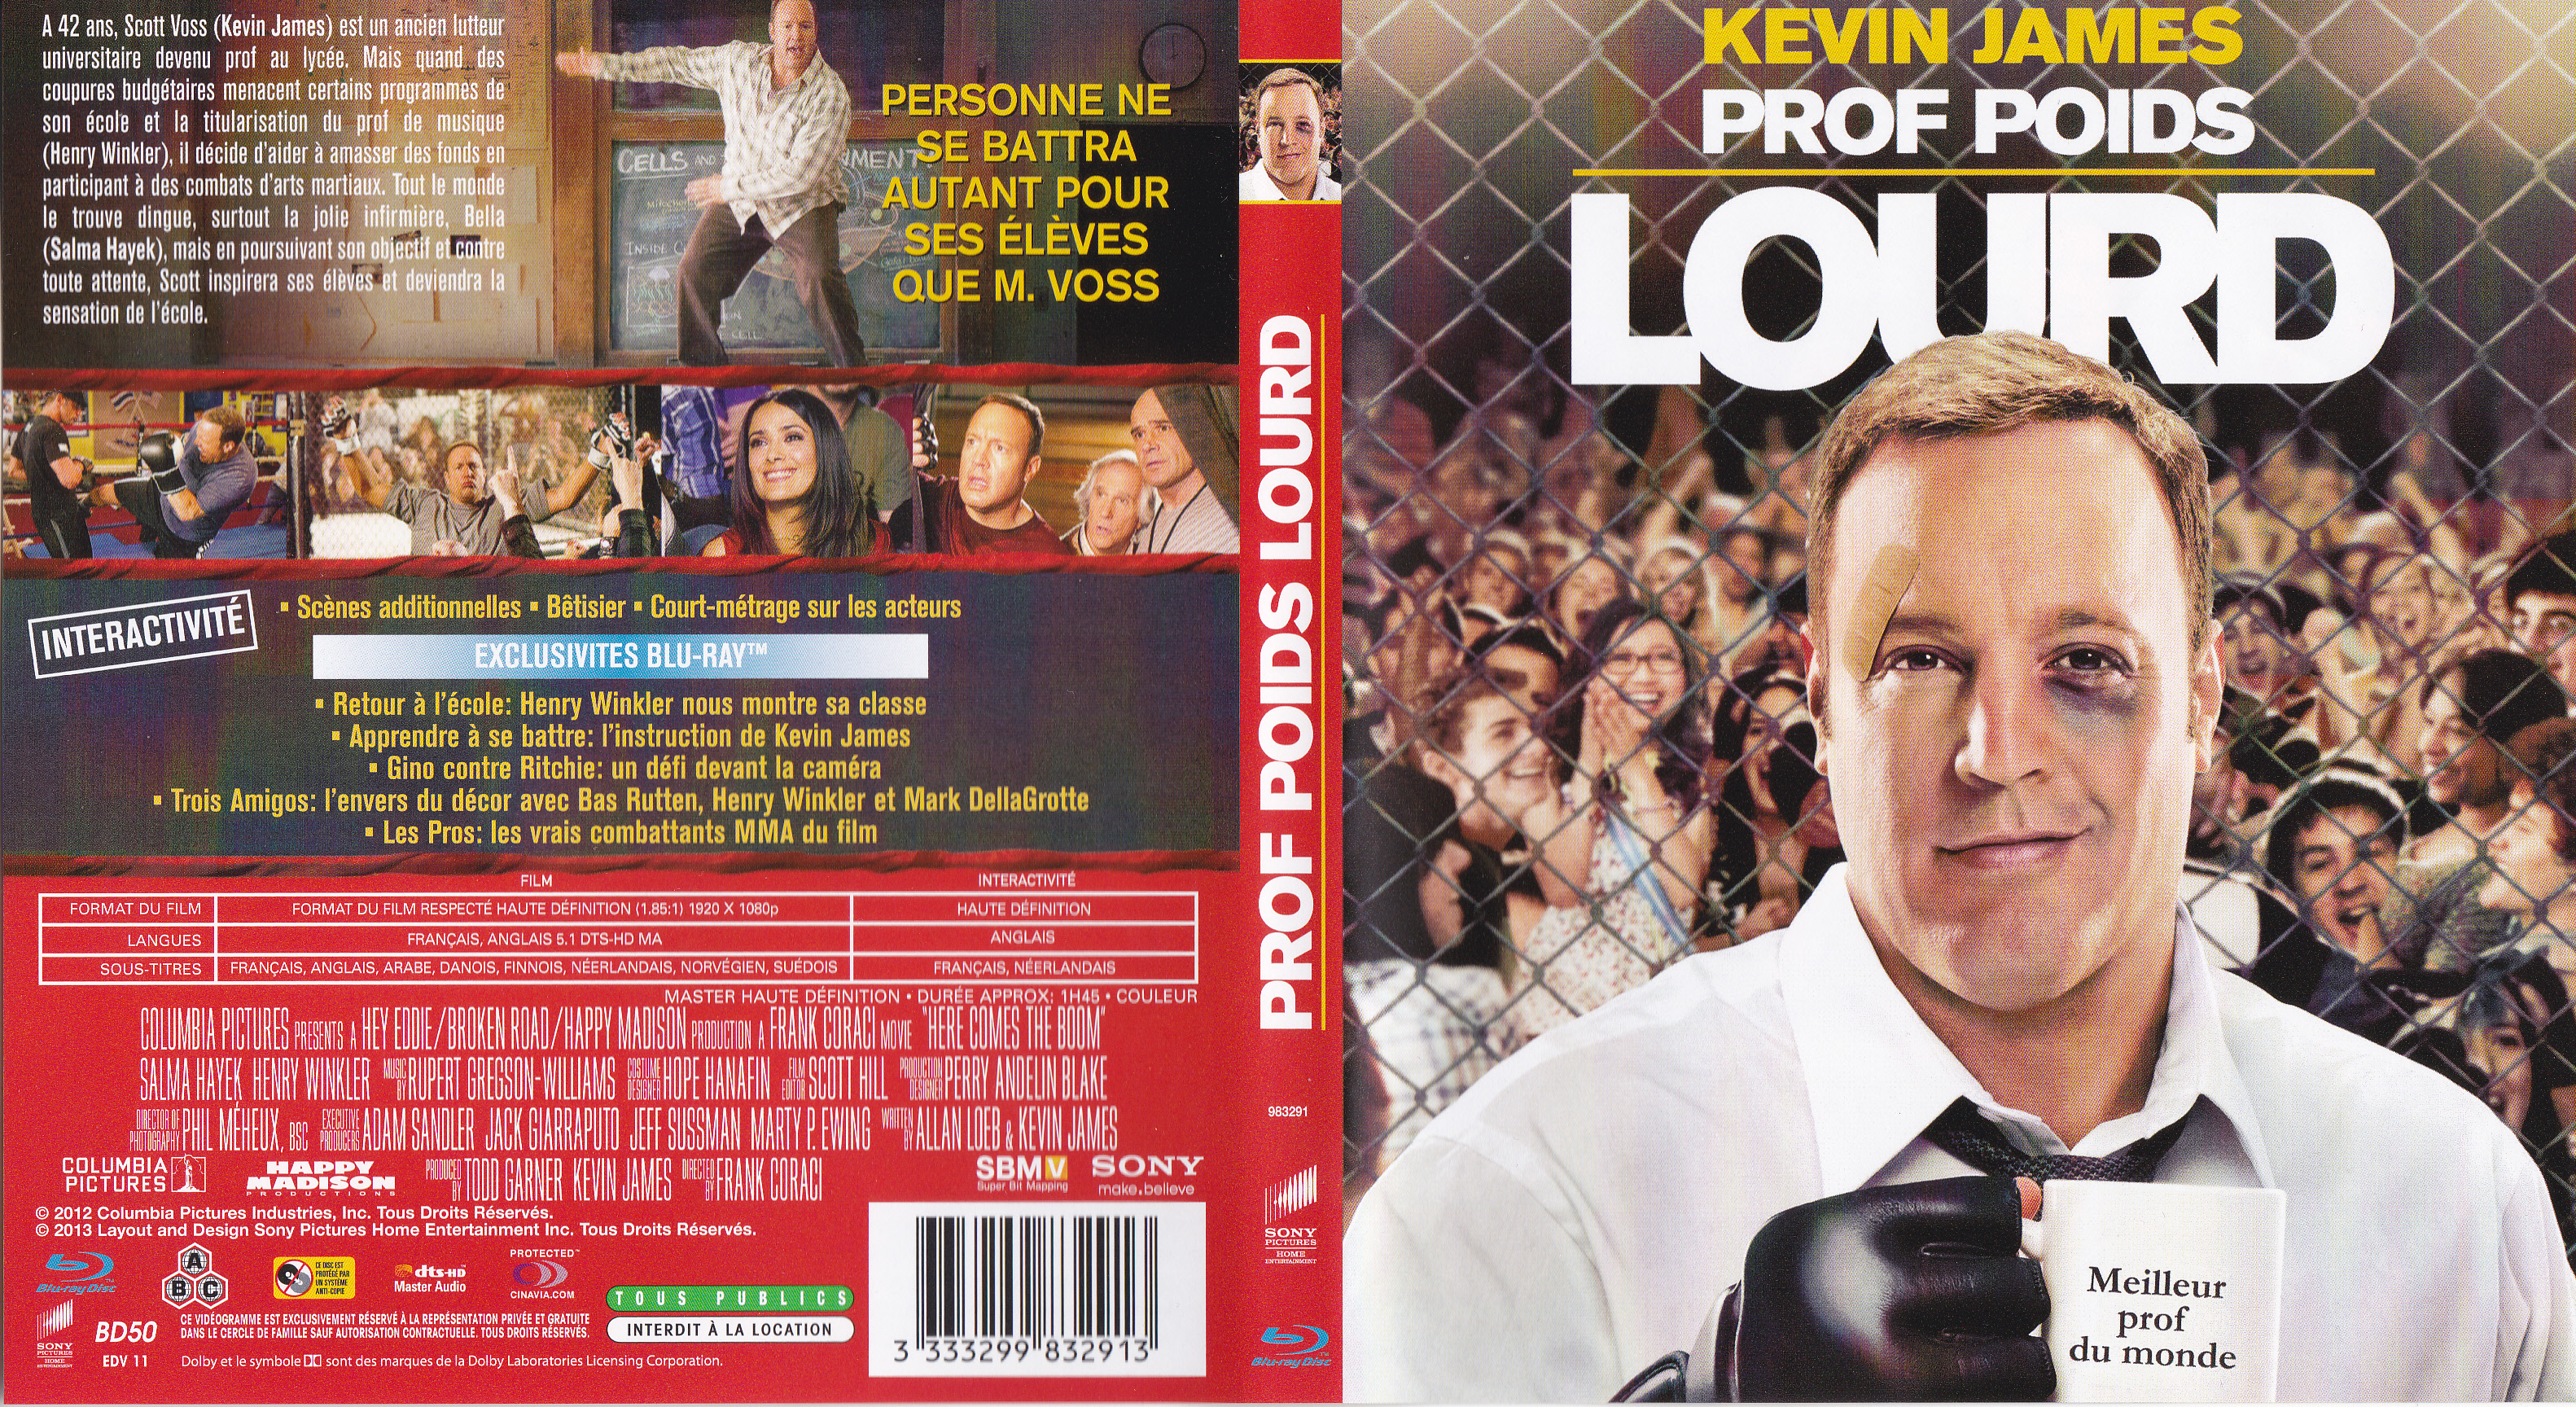 Jaquette DVD Prof poids lourd (BLU-RAY)